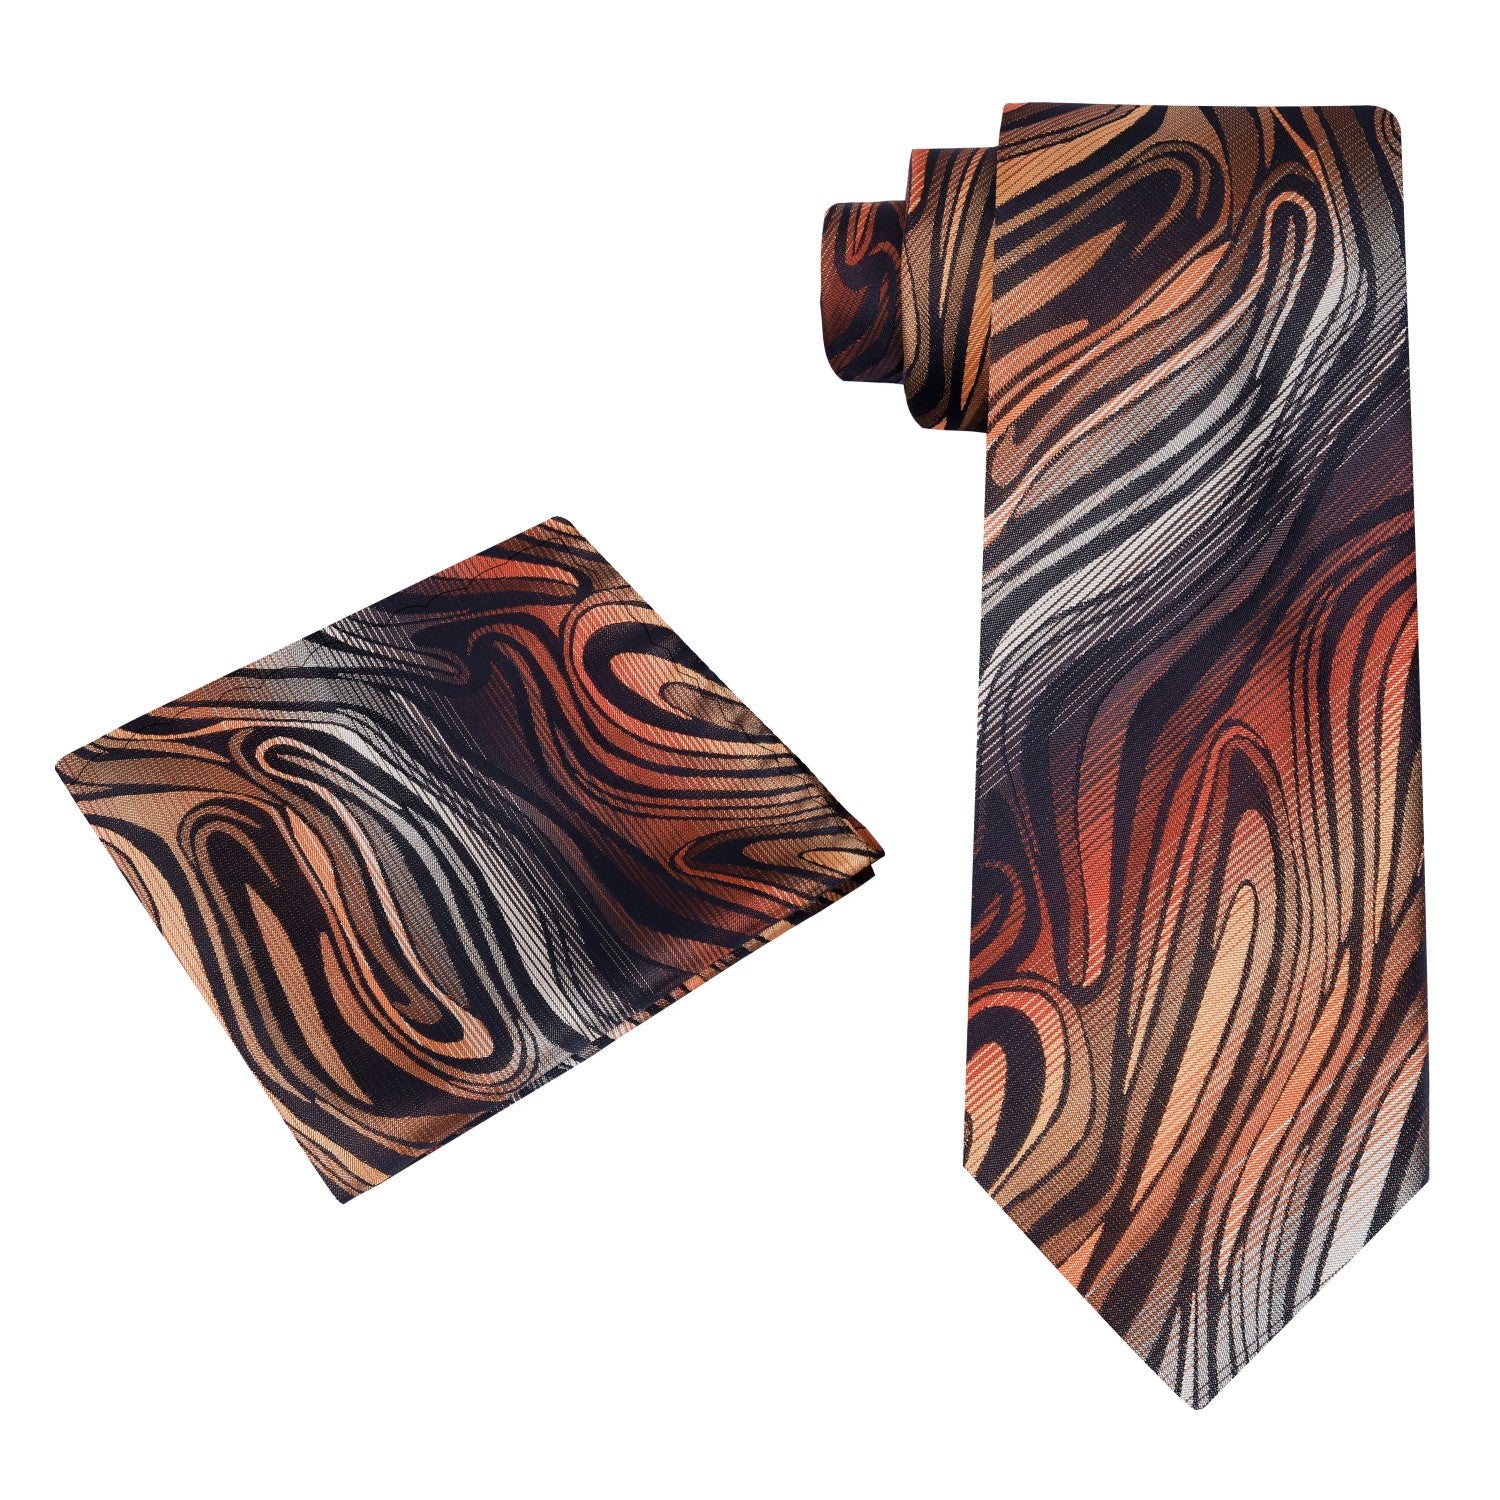 View 2: Orange, Black, Grey Abstract Tie and Matching Square